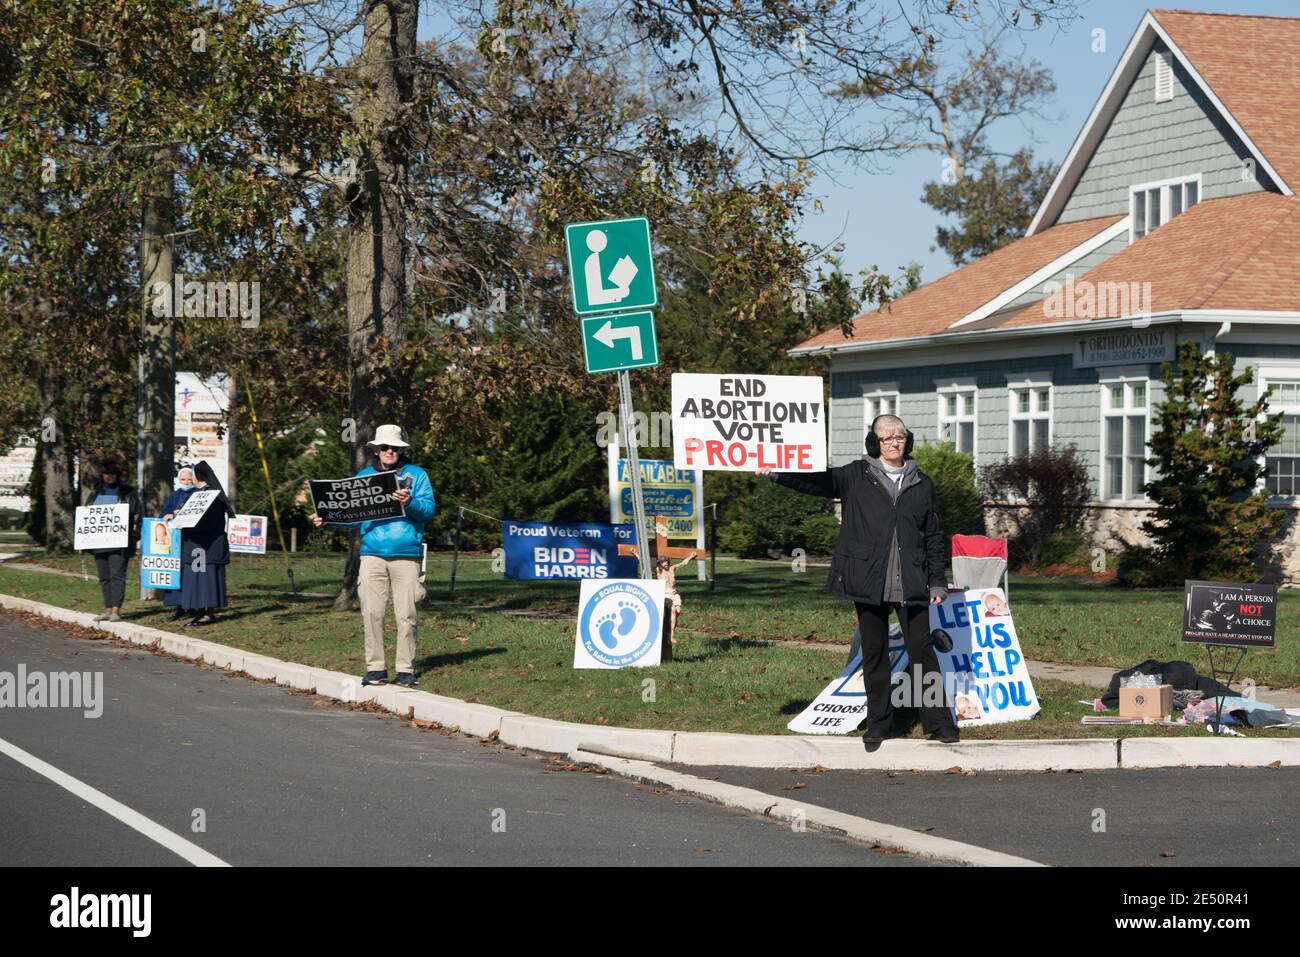 Galloway, NJ - Oct. 31, 2020: Woman holding an 'End Abortion! Vote Pro-Life' sign is part of an anti-abortion protest group. Stock Photo